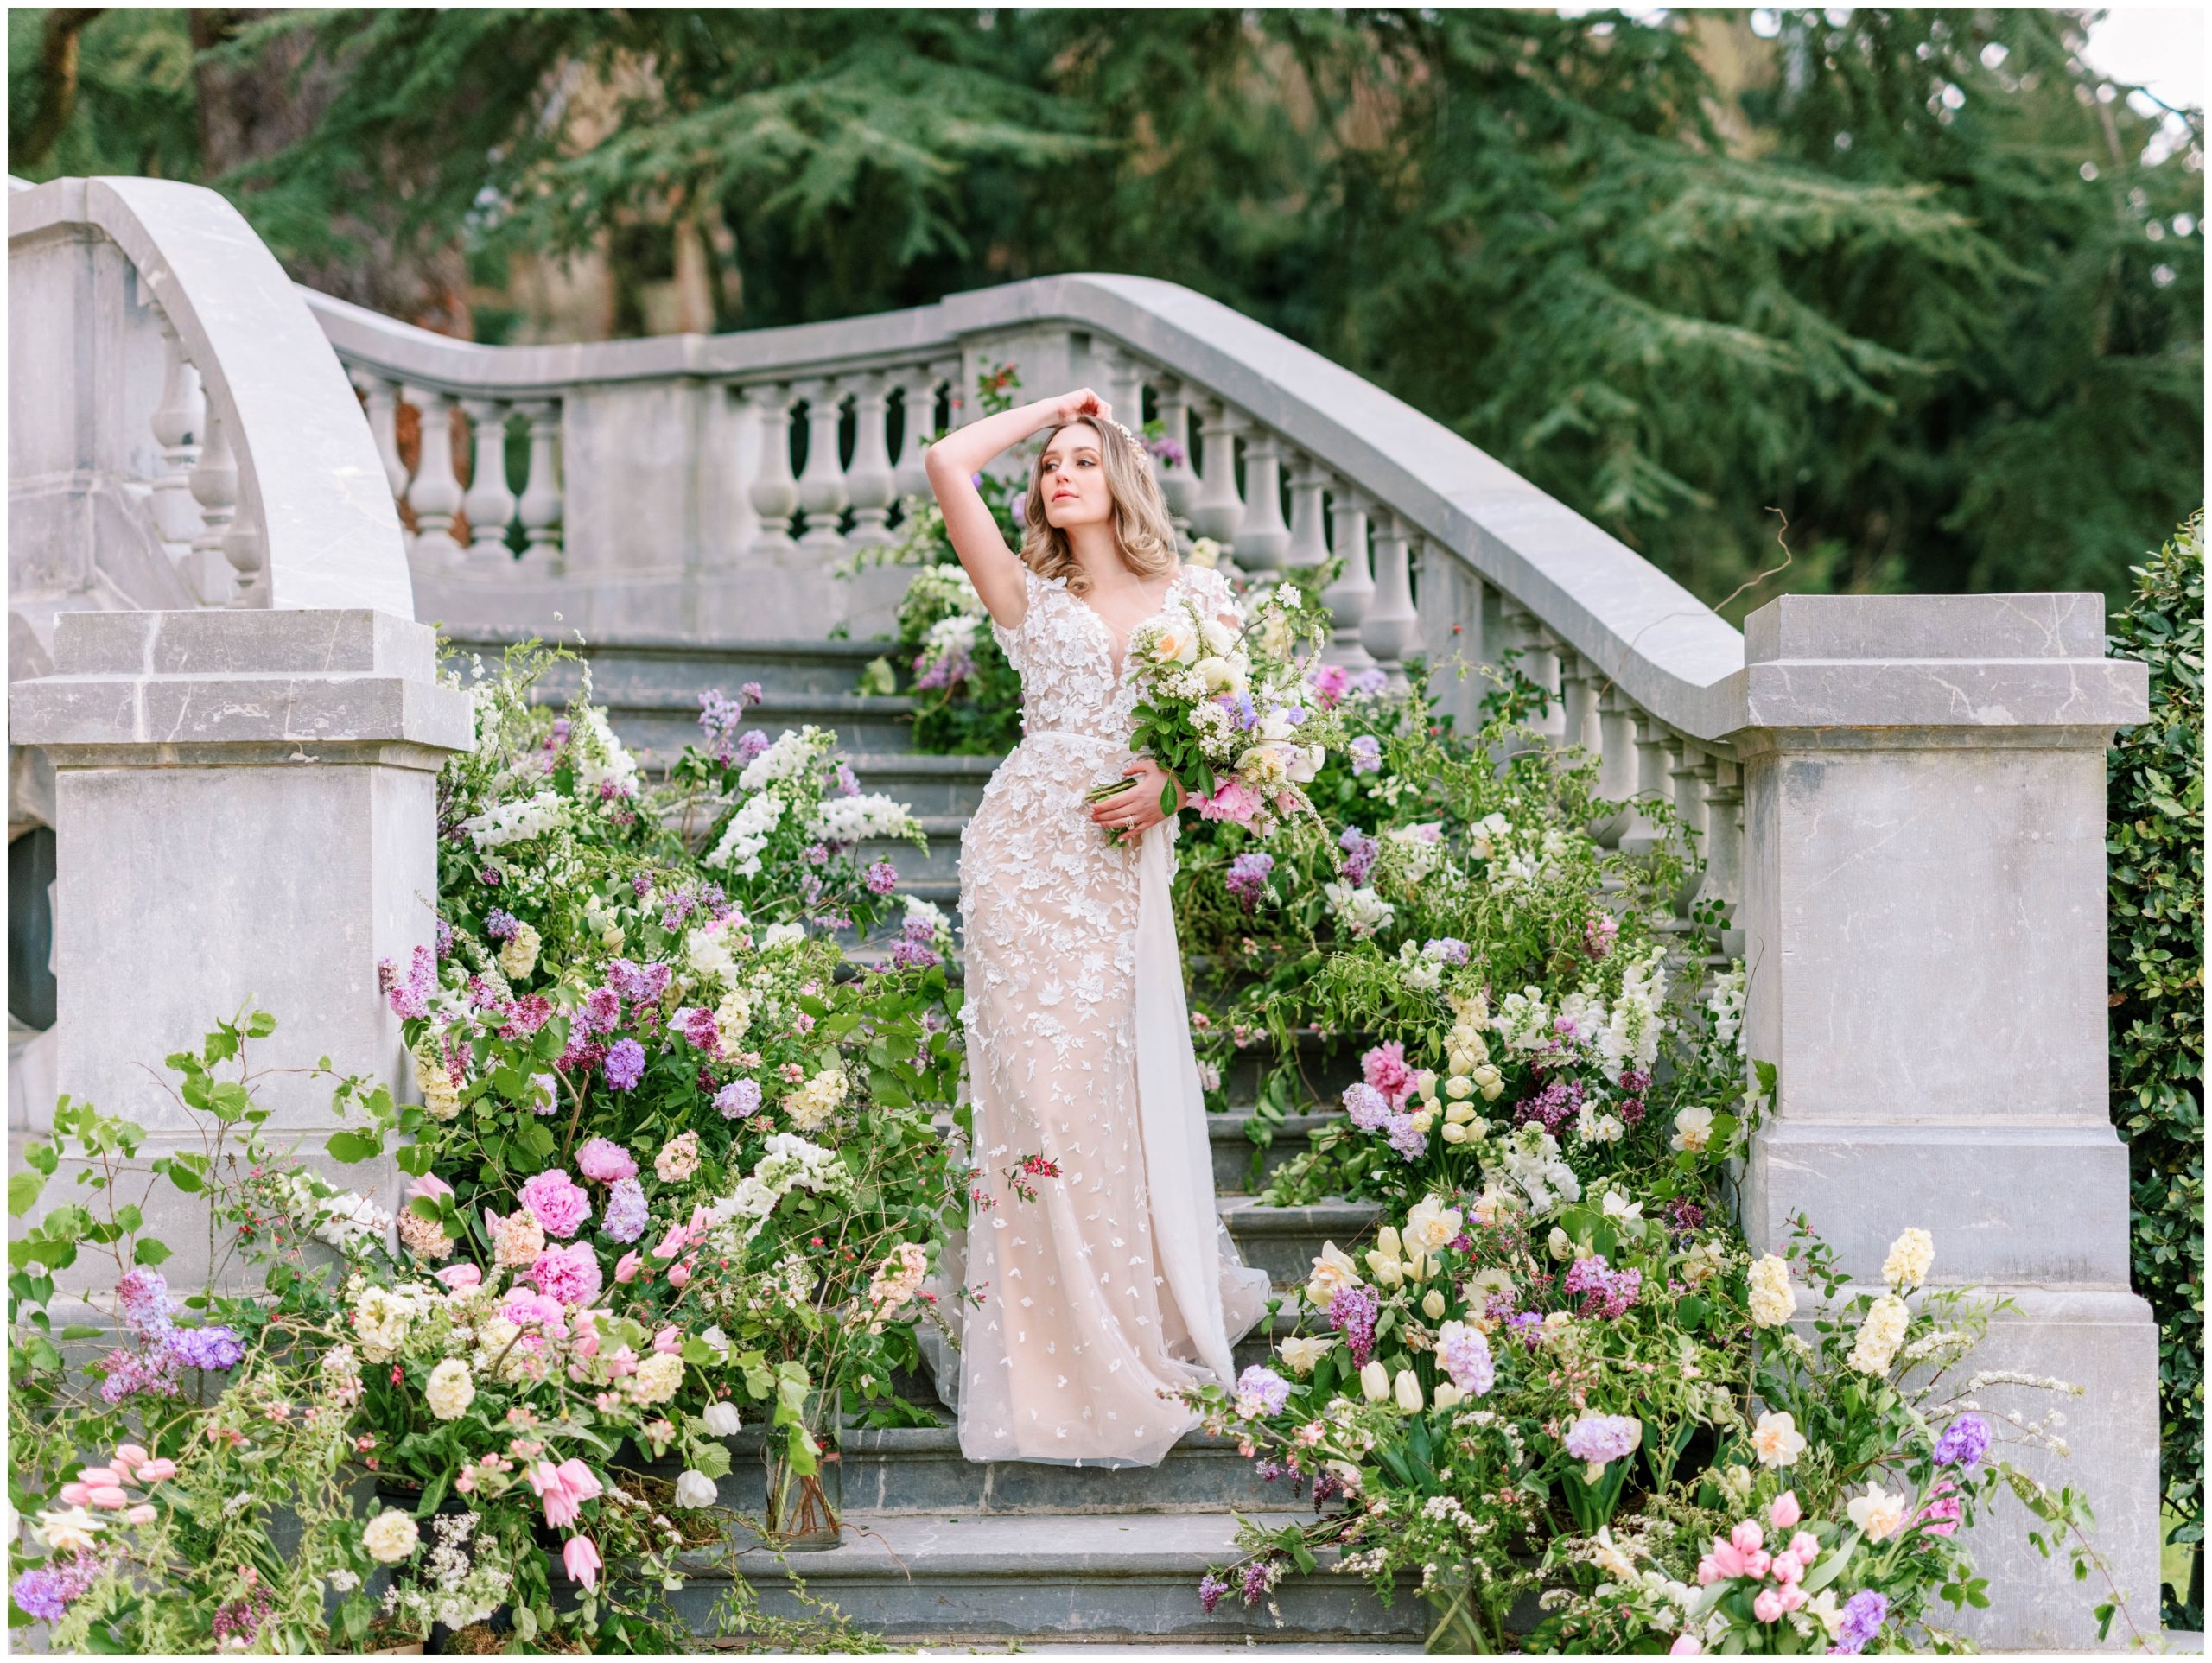 Bride posing with pink, purple, and cream-colored flowers for a garden-inspired wedding